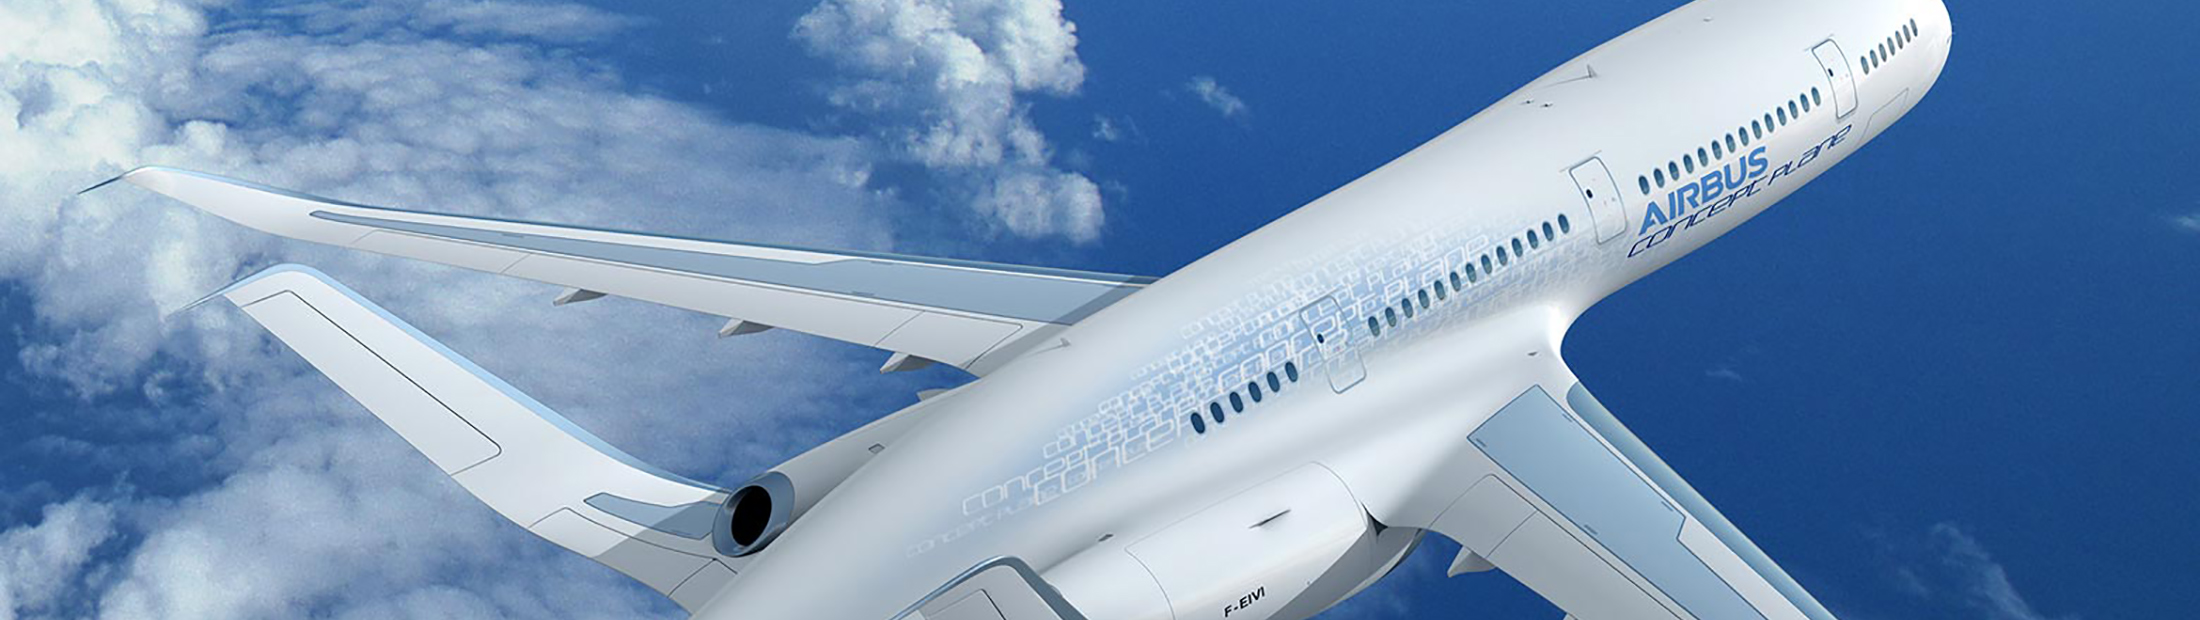 a concept plane illustration of the airbus in flight